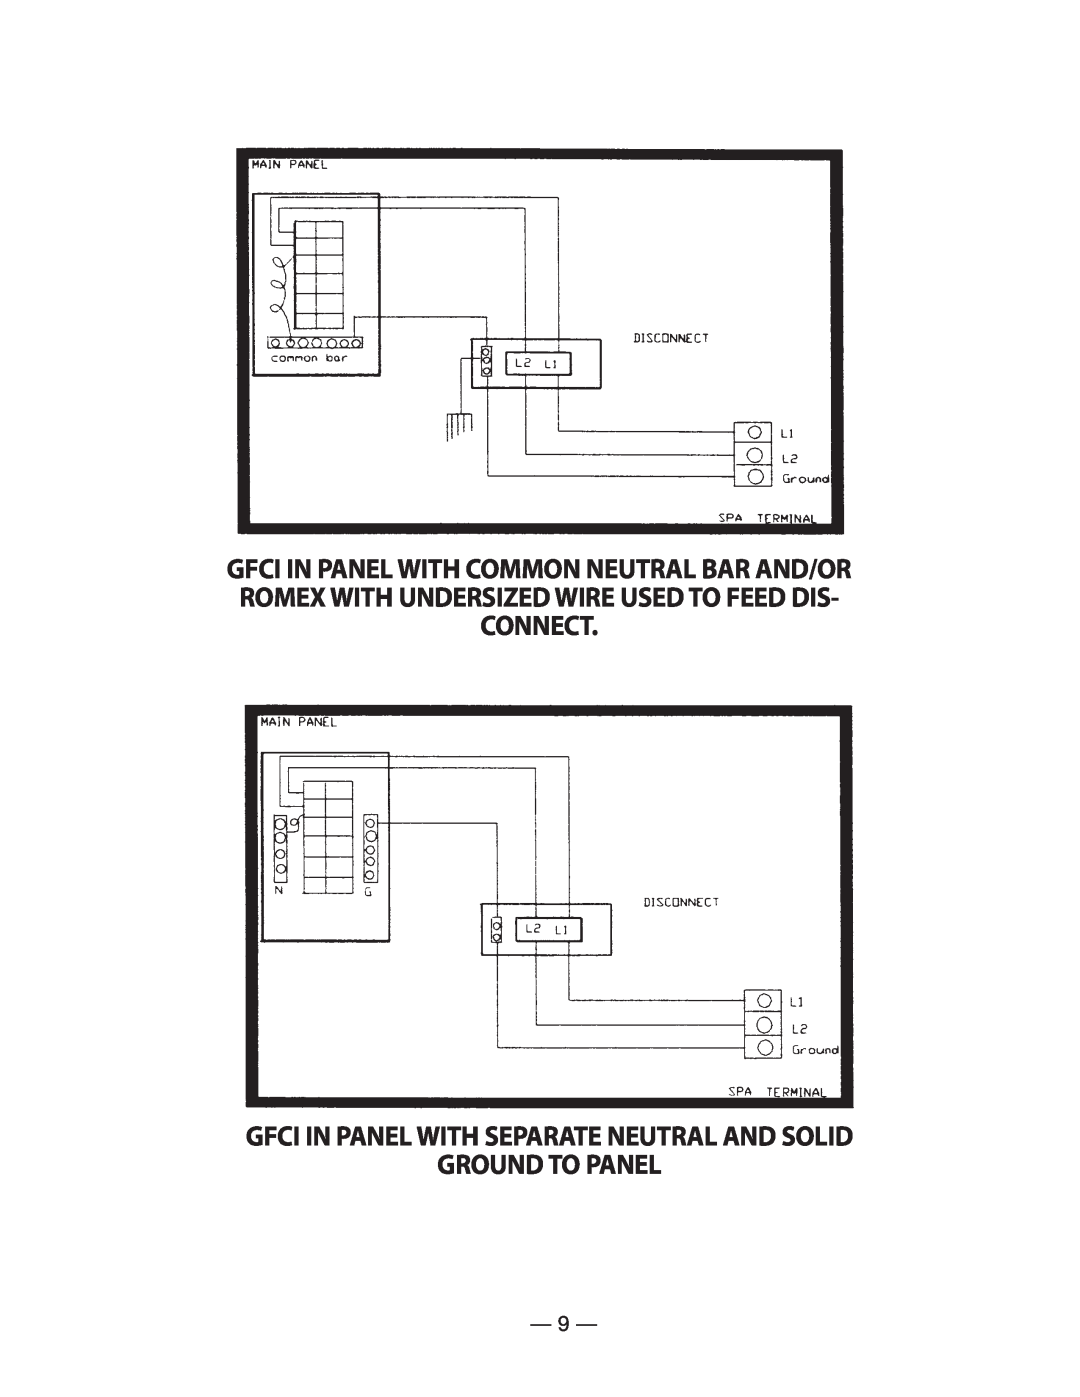 Vita Spa U -1 3 0 manual Gfci In Panel With Separate Neutral And Solid, Ground To Panel 